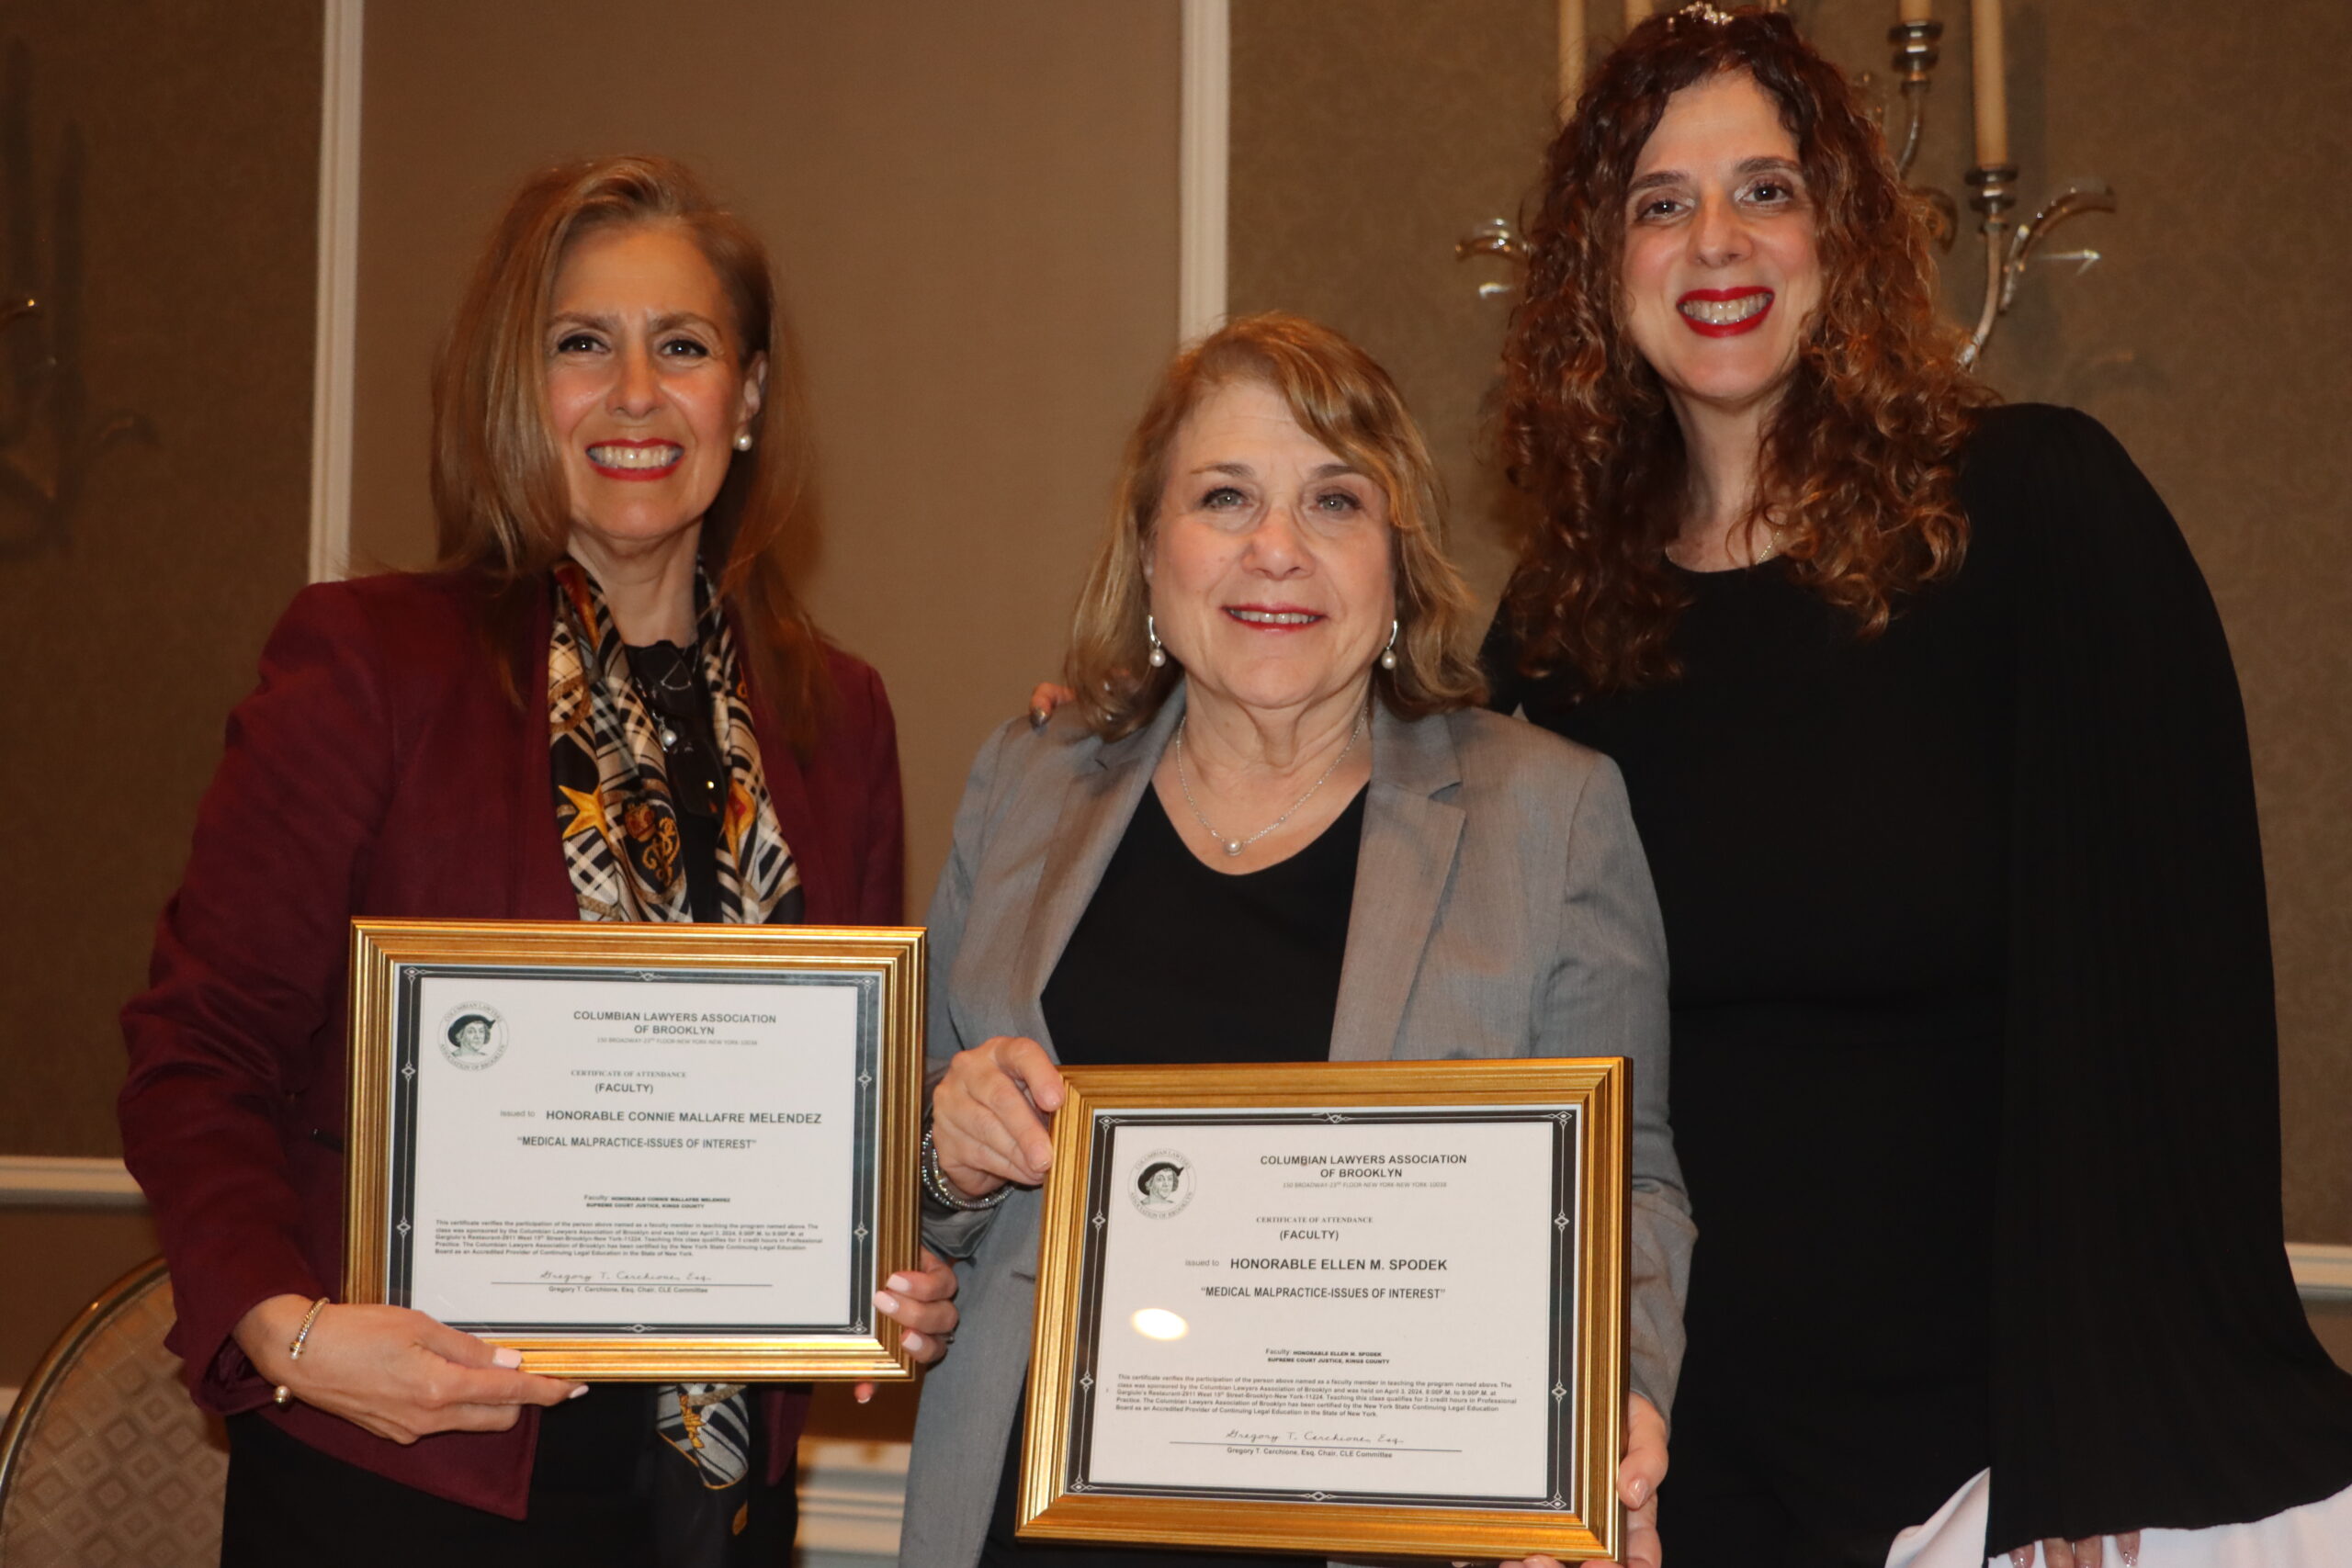 The Columbian Lawyers Association of Brooklyn and its President, Yolanda Guadagnoli (right), welcomed Justices Connie Mallafre Melendez (left) and Hon. Ellen Spodek (center) as its guest speakers during its CLE meeting this month. Brooklyn Eagle photos by Mario Belluomo